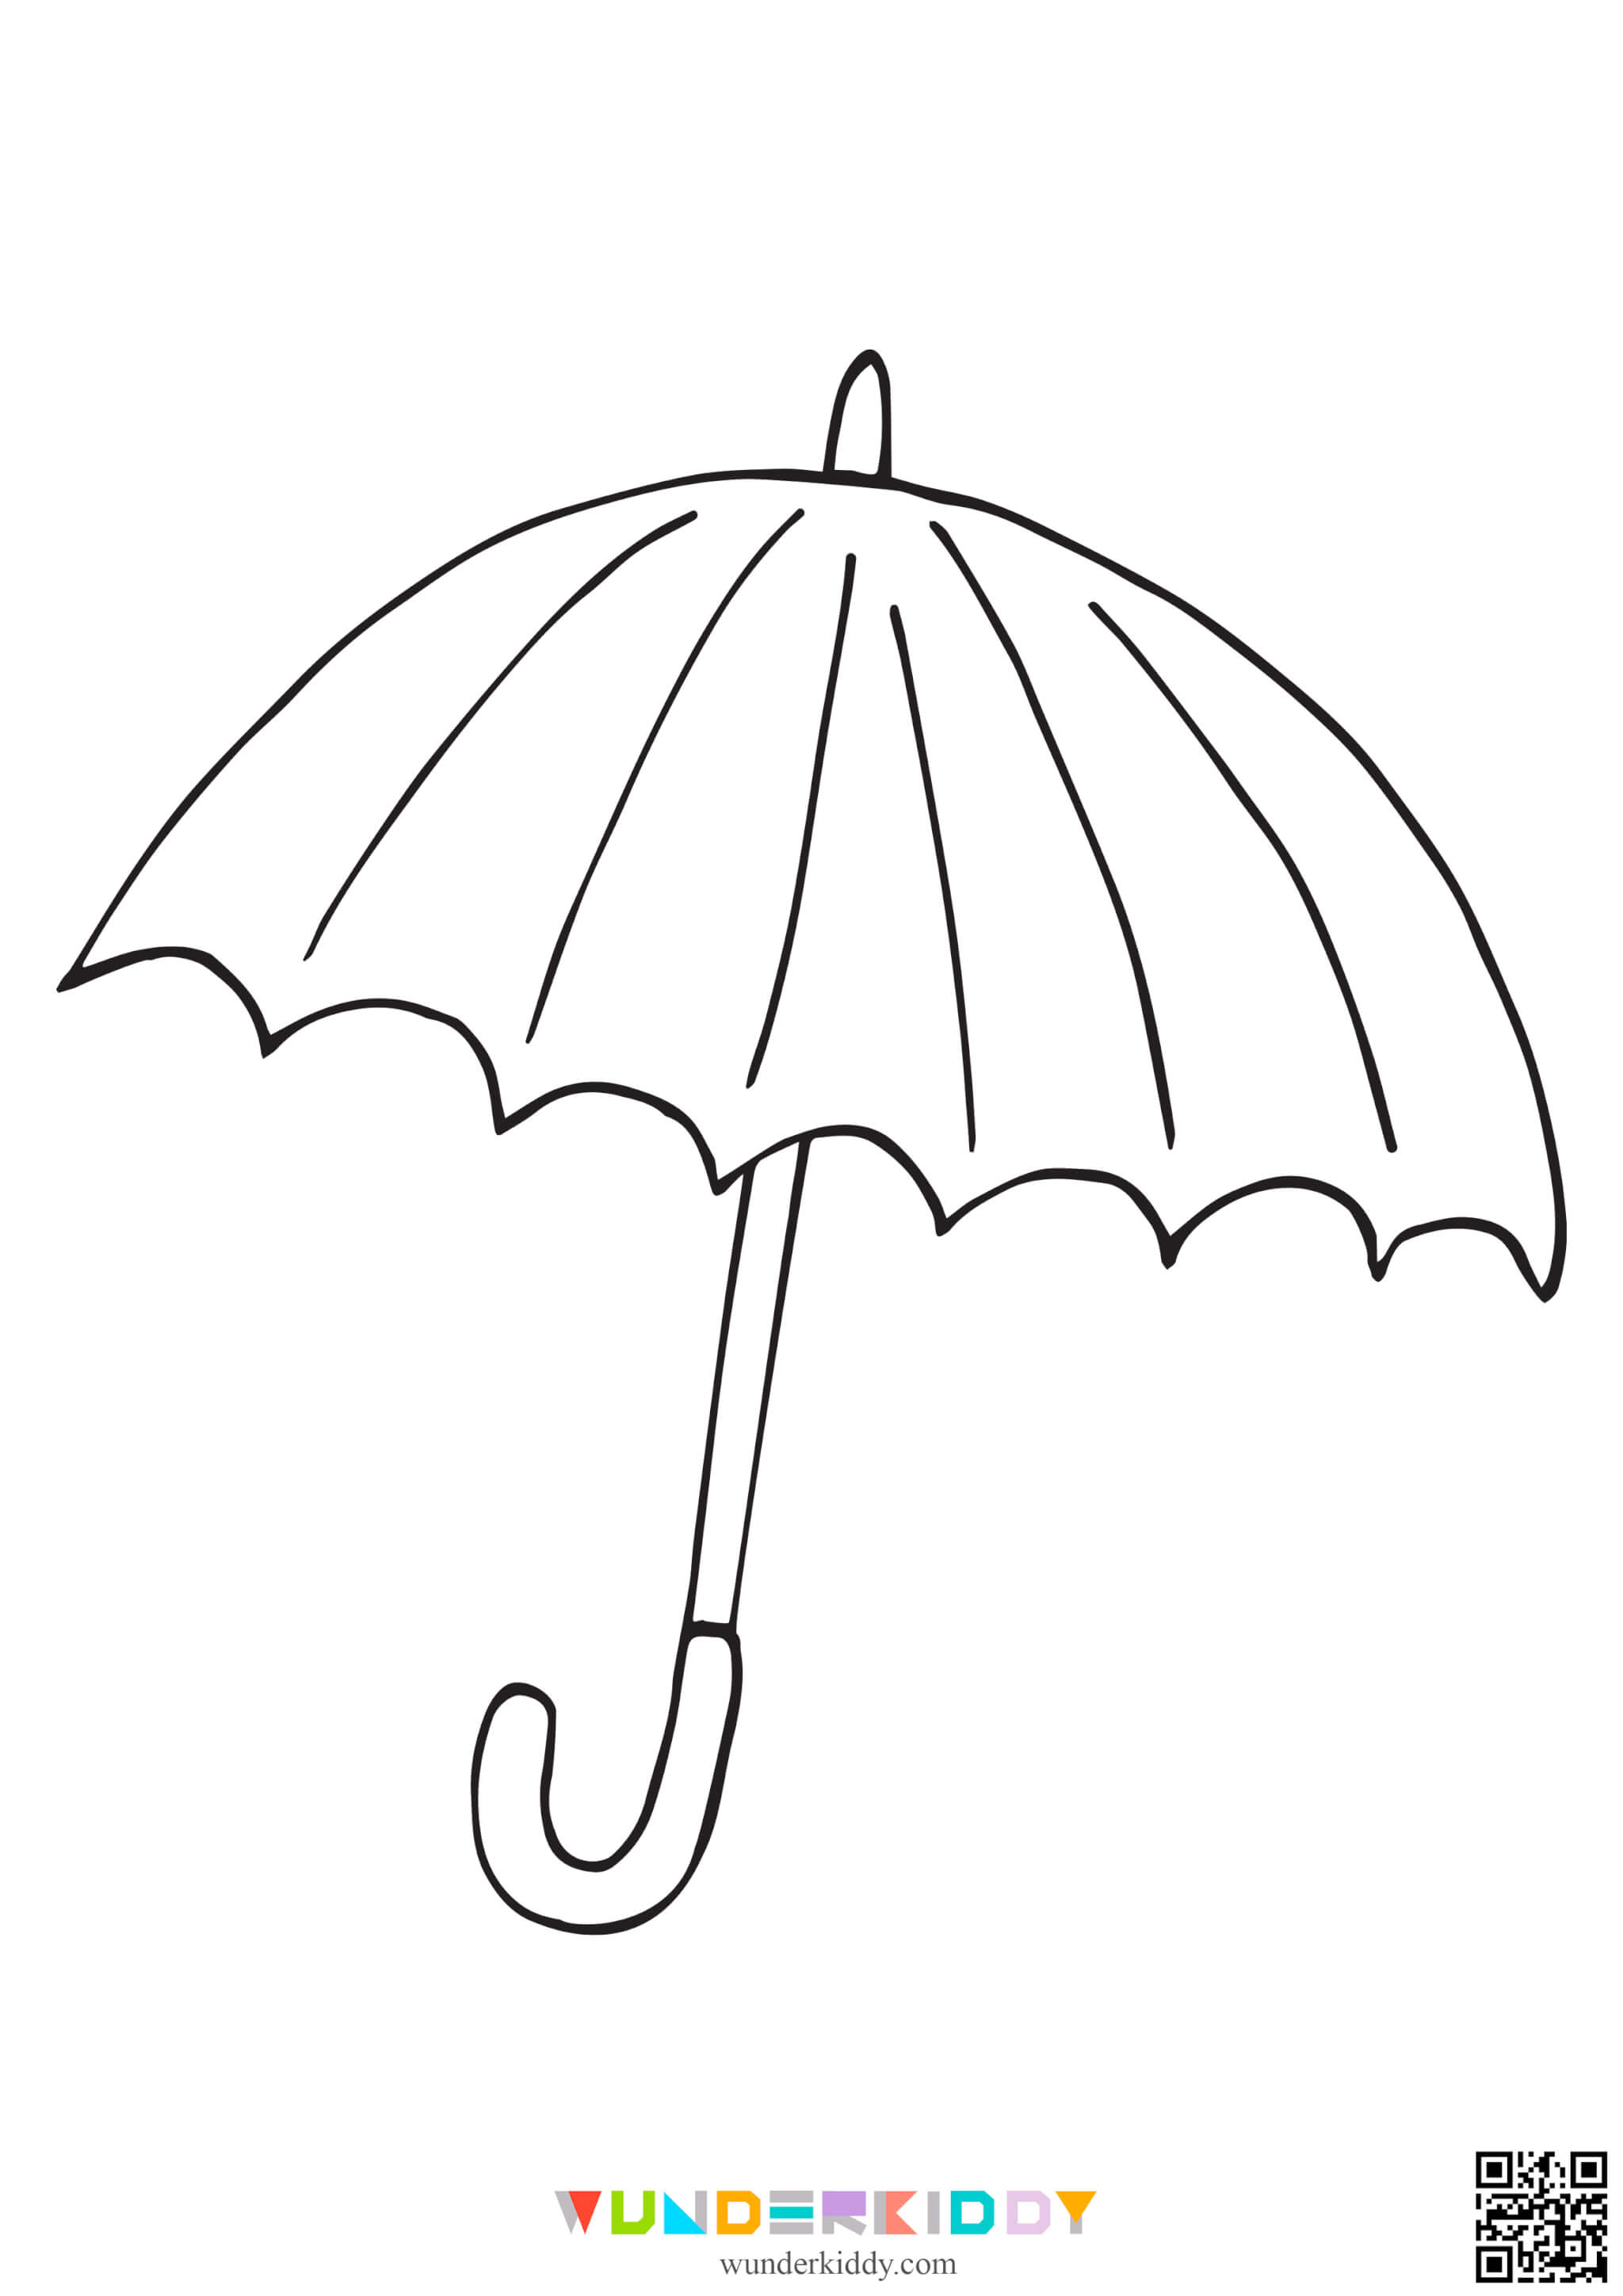 Umbrella Coloring Pages for Kids - Image 3